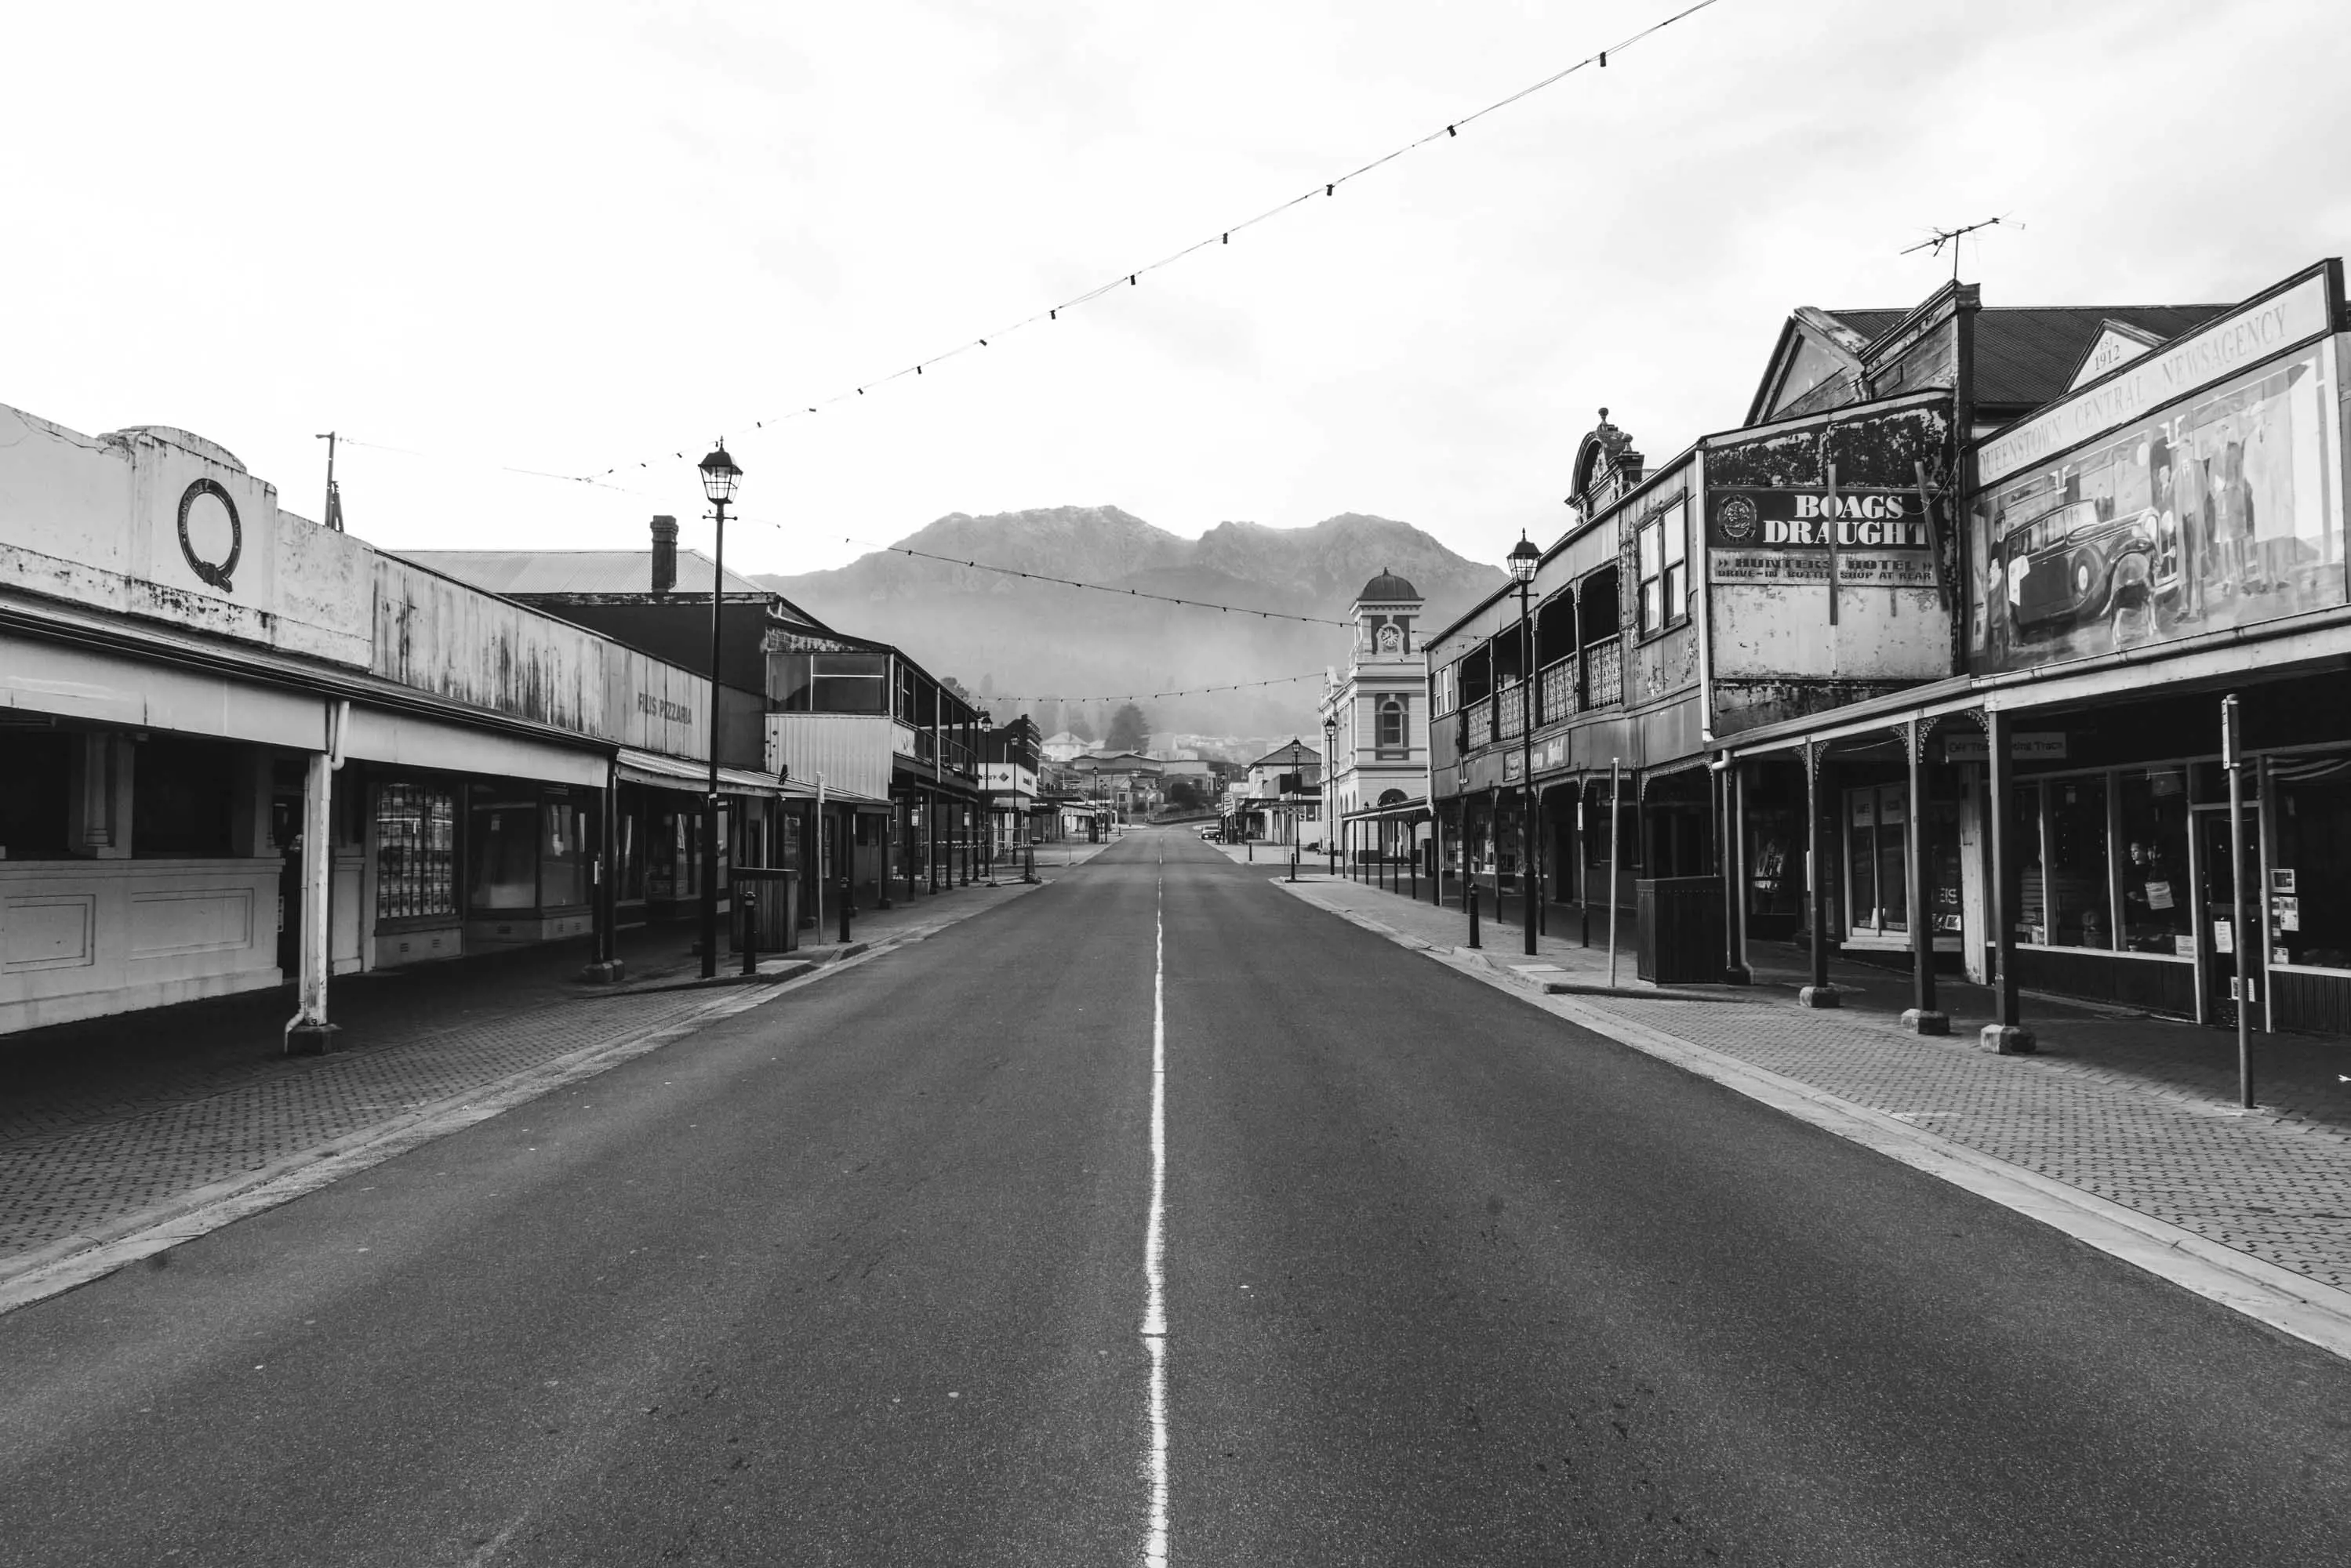 A wide street cuts through a quiet town with misty mountain in the background.